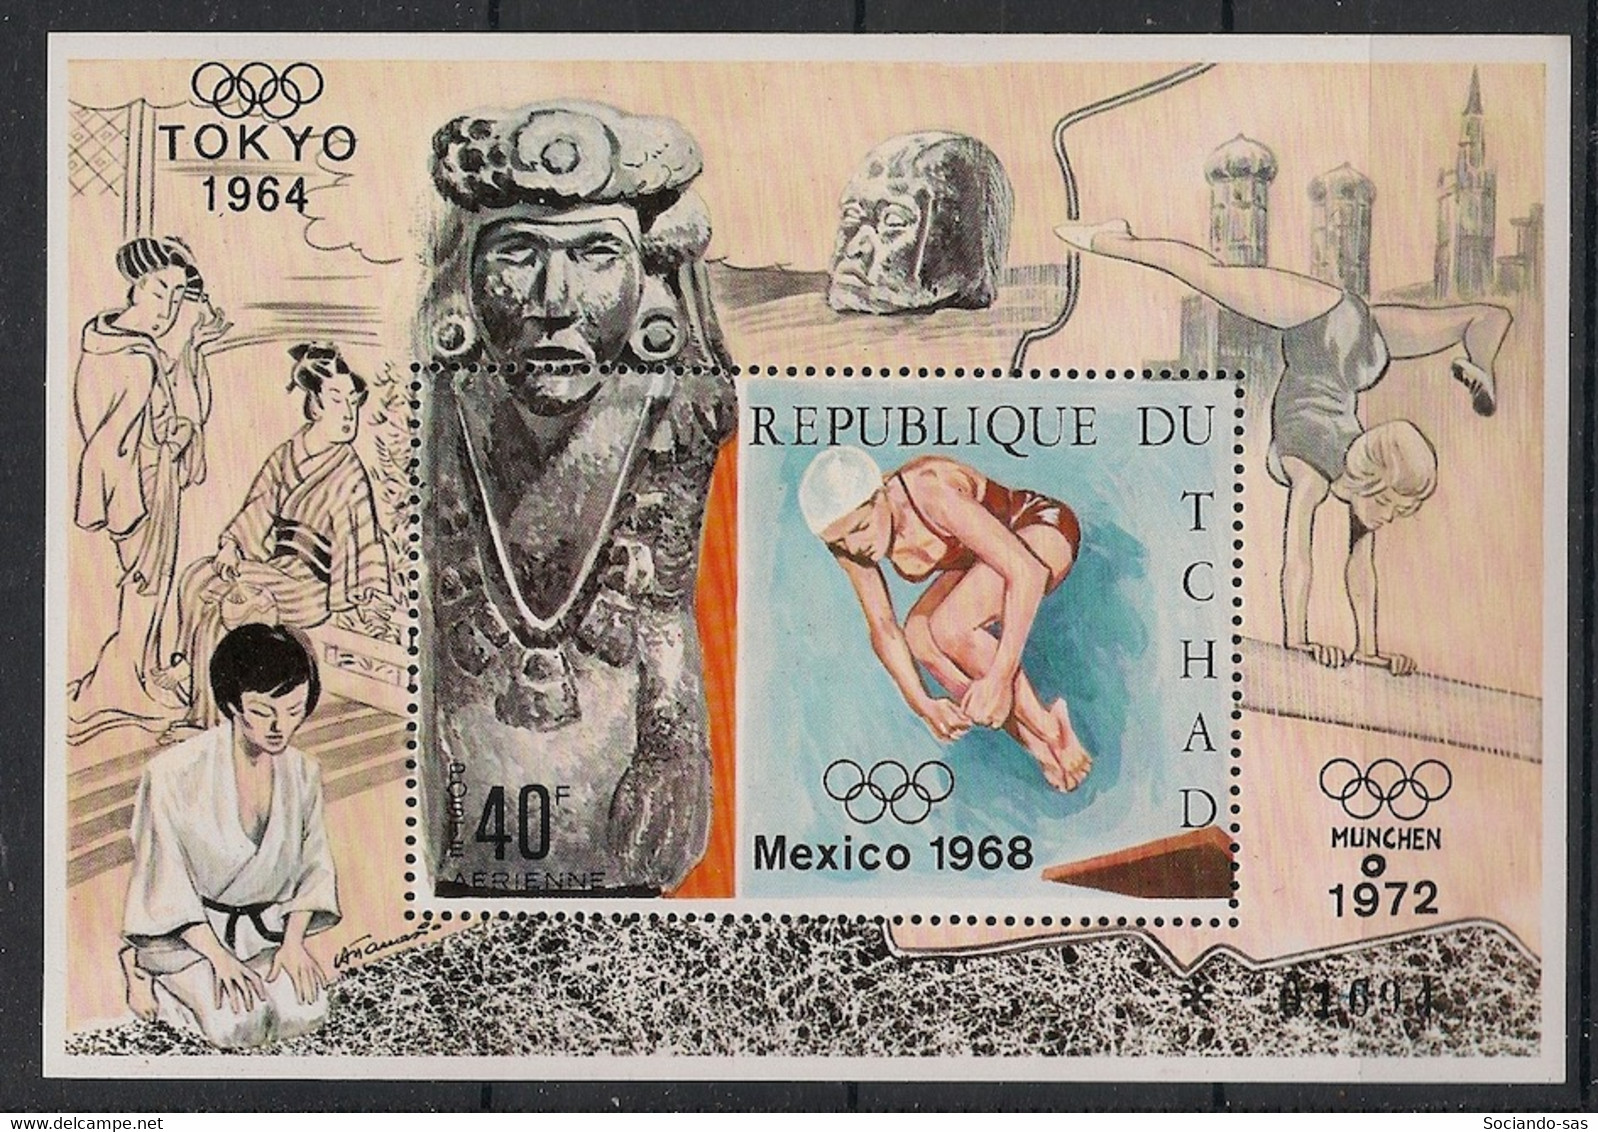 TCHAD - 1970 - Bloc Feuillet BF  N°Mi. 11 - Olympics / Mexico - Neuf Luxe ** / MNH / Postfrisch - High Diving